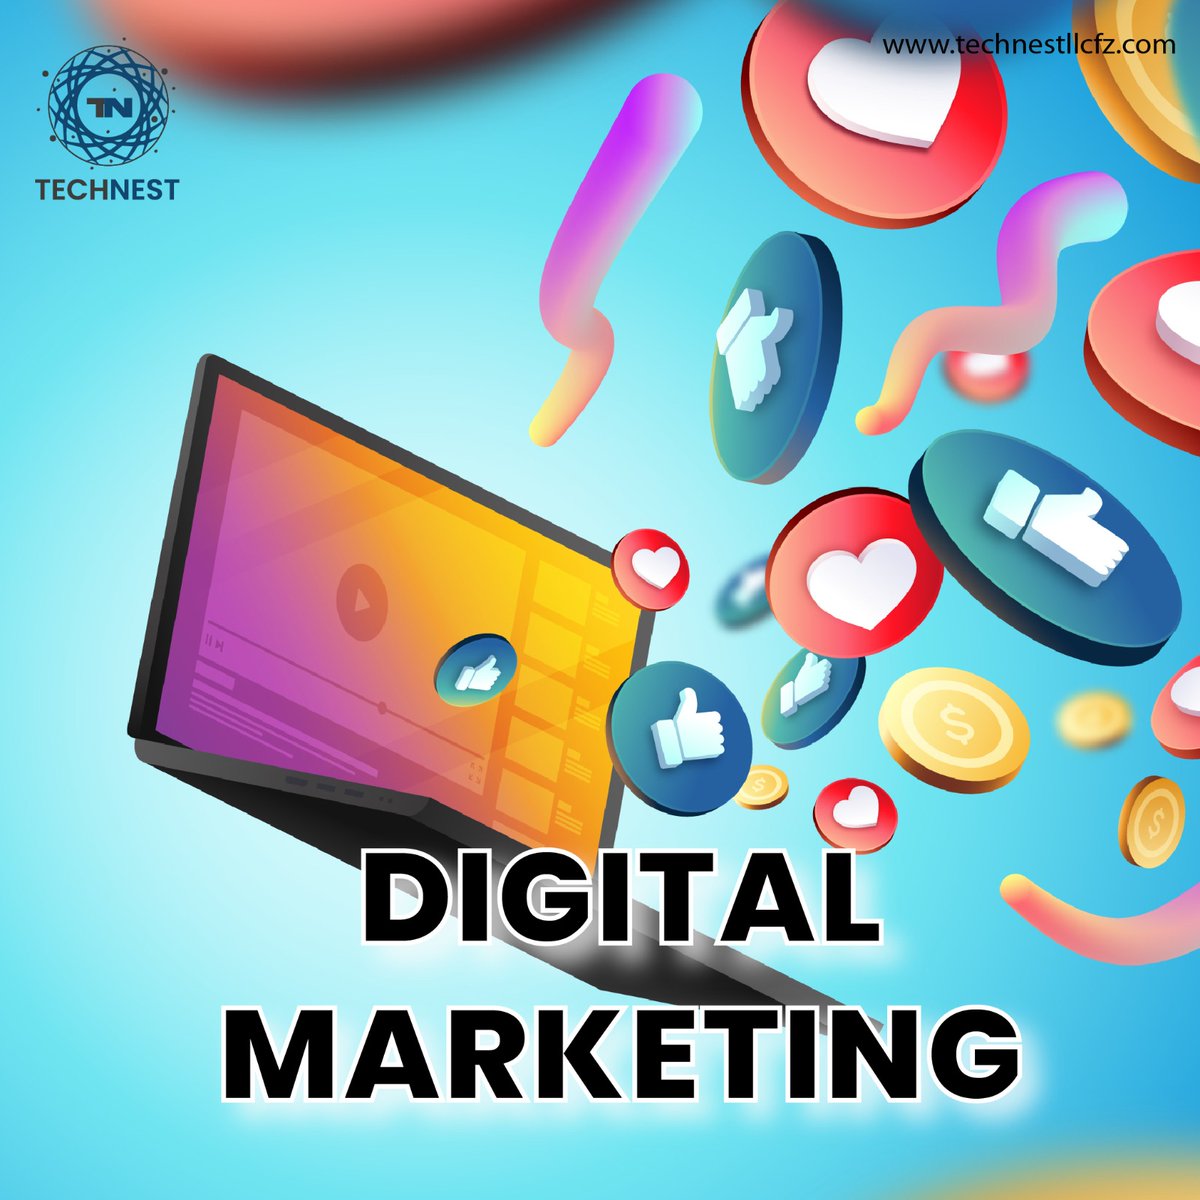 Reach the right audience, at the right time, with our data-driven digital marketing strategies. From search engine optimization to social media advertising, we'll help you grow your online presence and drive meaningful results. 
.
.
#digitalmarketing #technestllcfz #seo